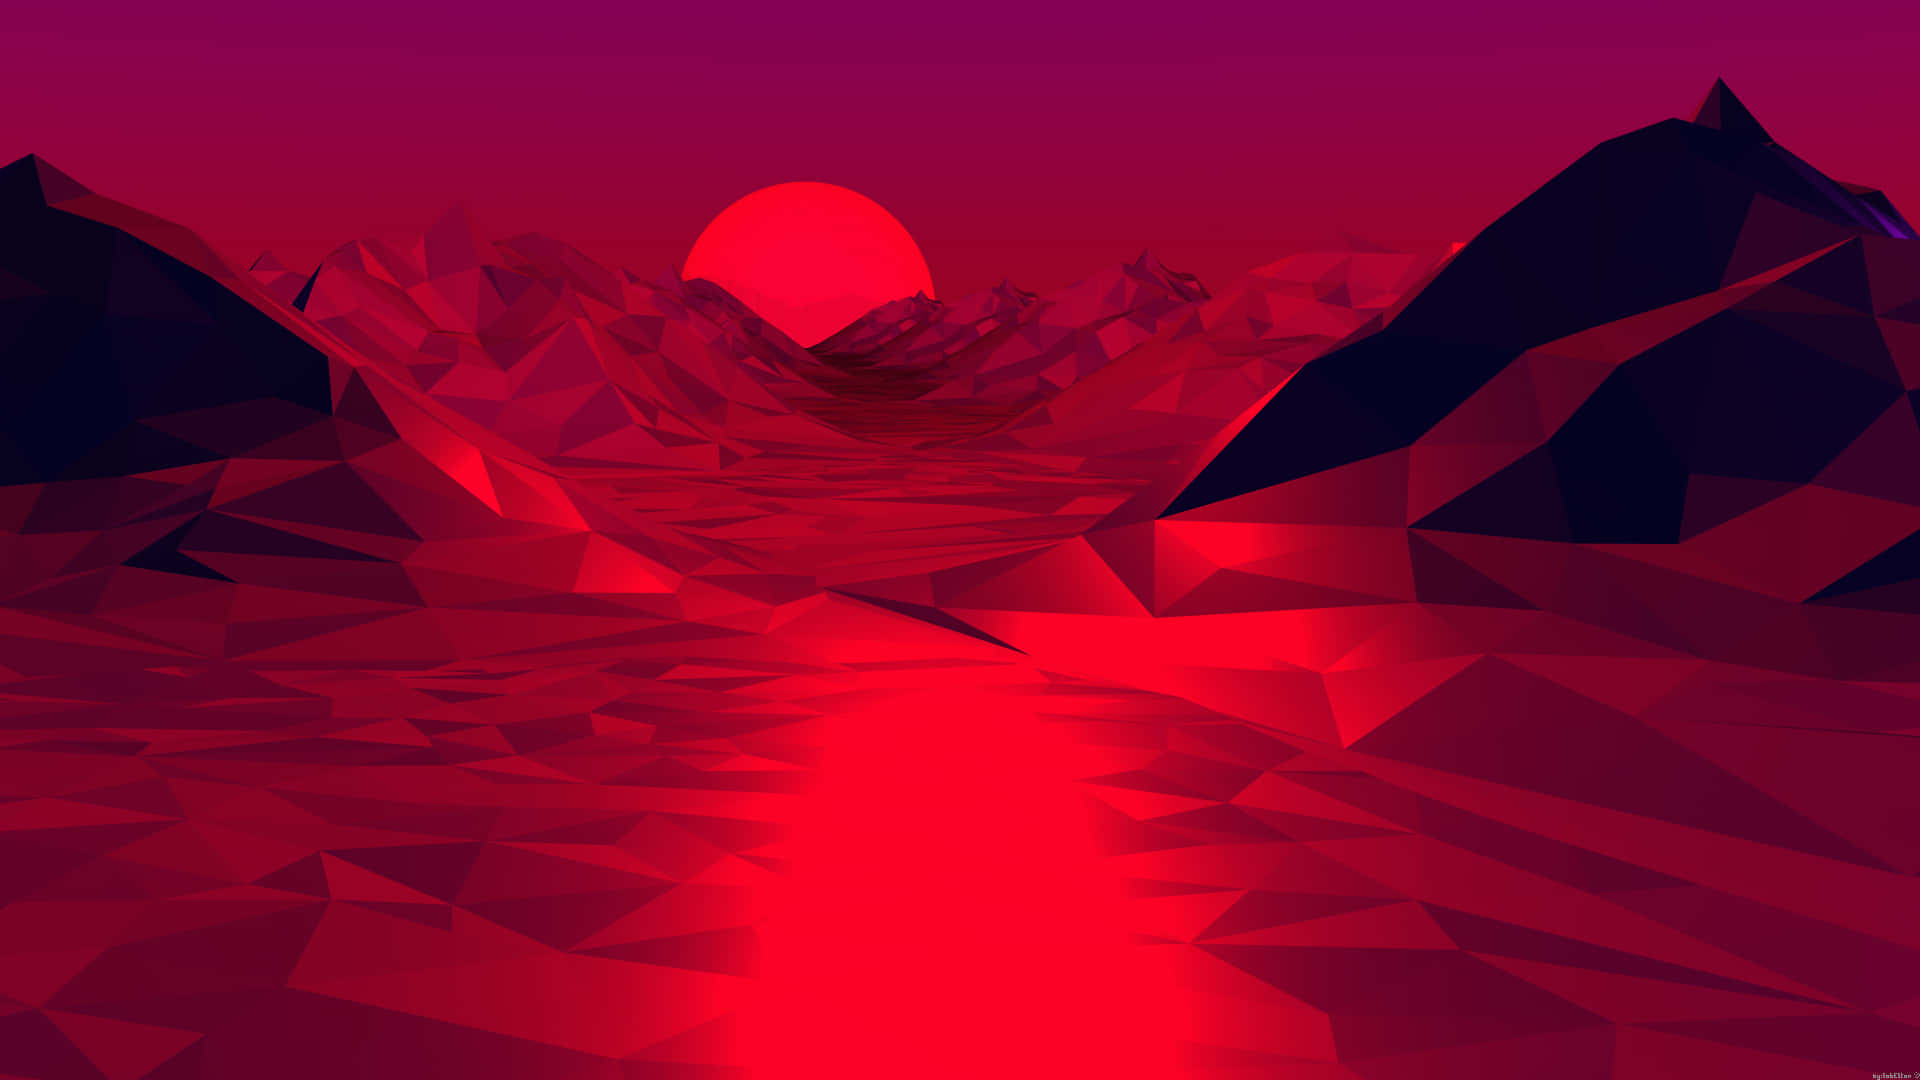 1920x1080 Red Abstract Mountain & Sunset Wallpaper